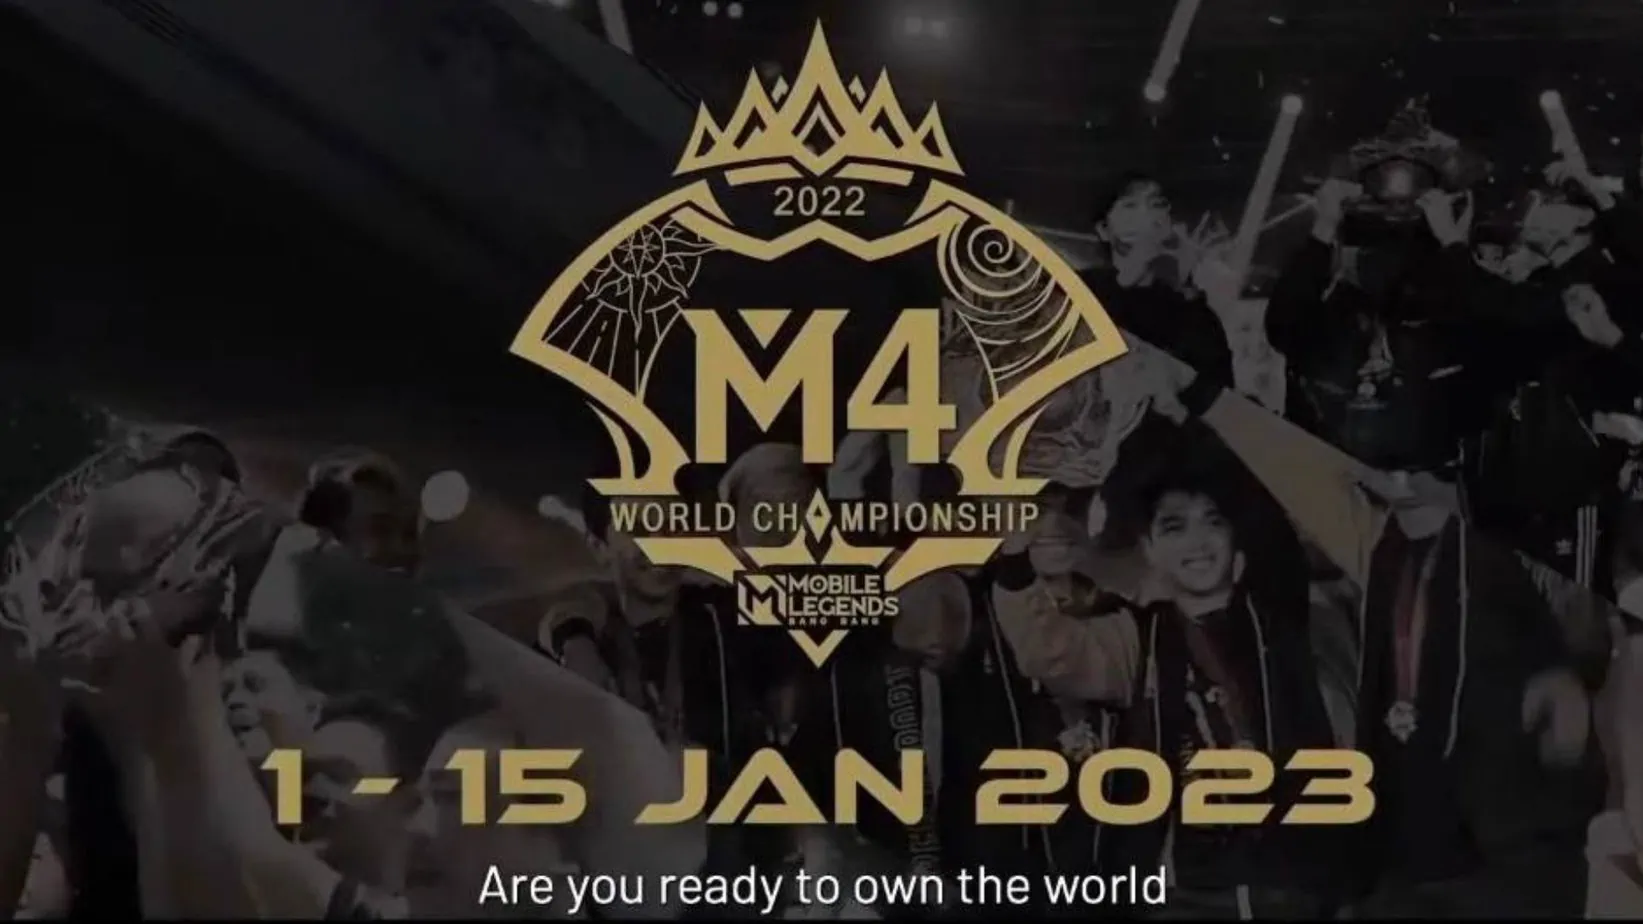 Mobile Legends M4 World Championship will take place in January 2023 ONE Esports